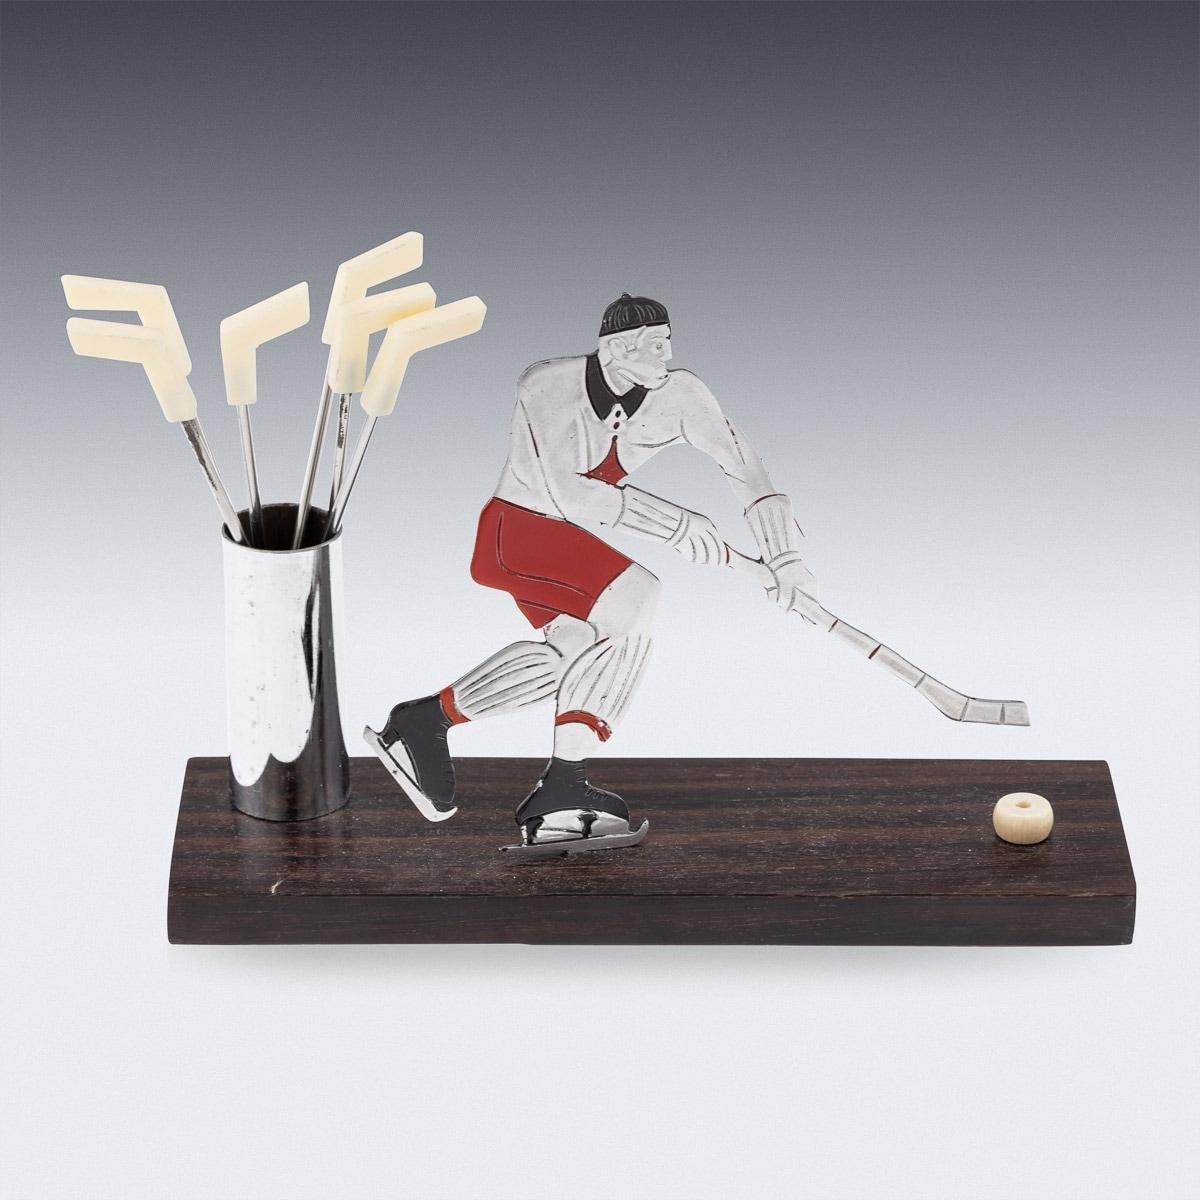 Antique 20th century Art Deco metal chrome plated & enamelled cocktail stick set, in the form of an ice hockey player, the 6 cocktail stick finials modelled as hockey sticks with celluloid finials. Just as the prohibition era was lifted in the USA